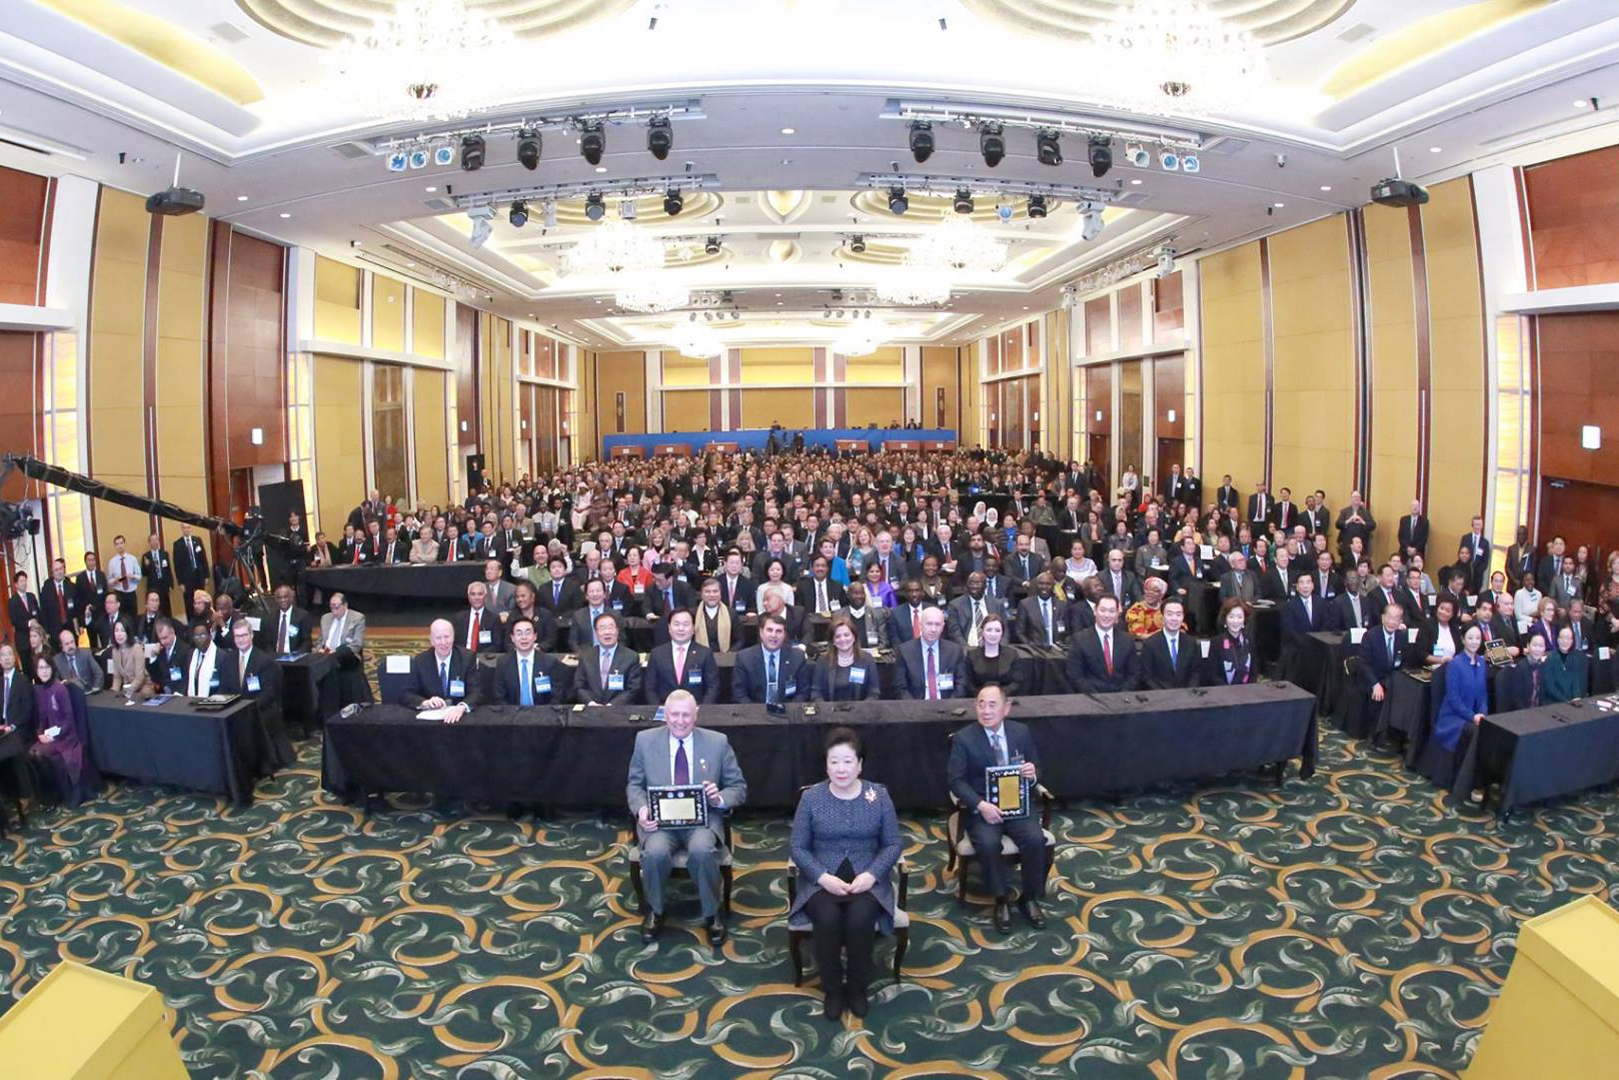 IAPP General Assembly (February 4 2017, Jamsil Lotte Hotel)